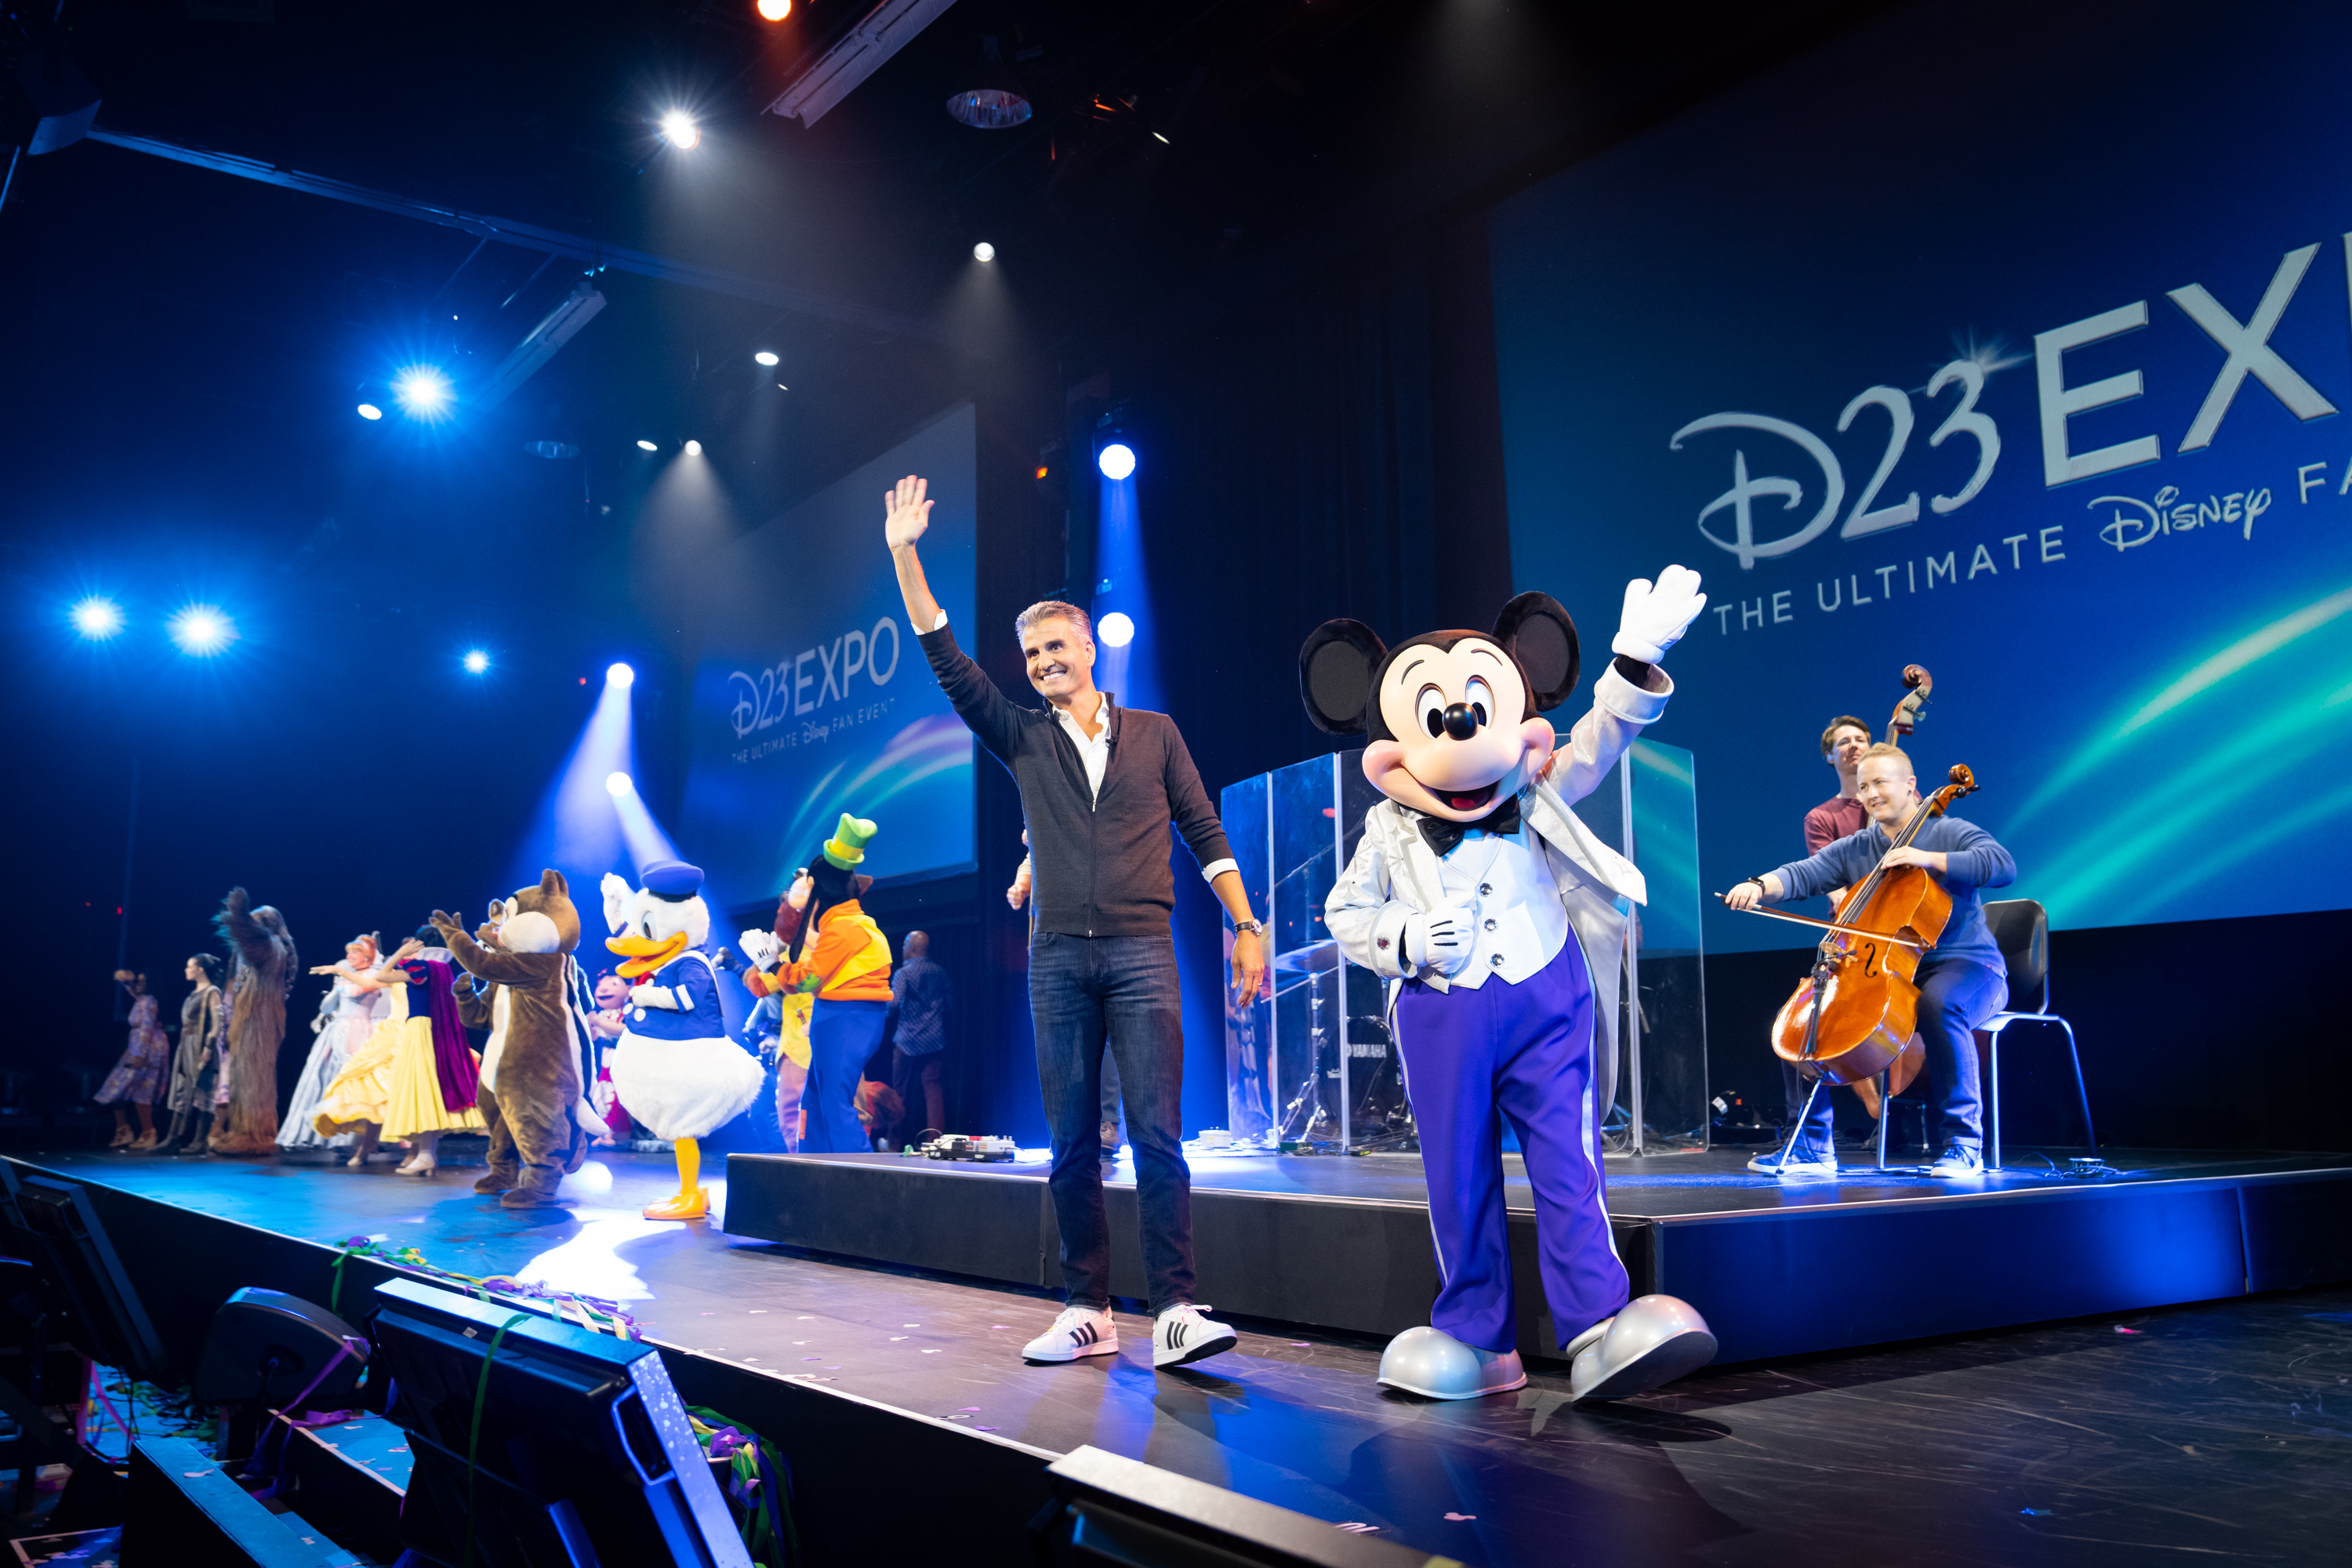 Take a Look at the Highlights of A Boundless Future: Disney Parks, Experiences and Products Panel at D23 Expo 2022